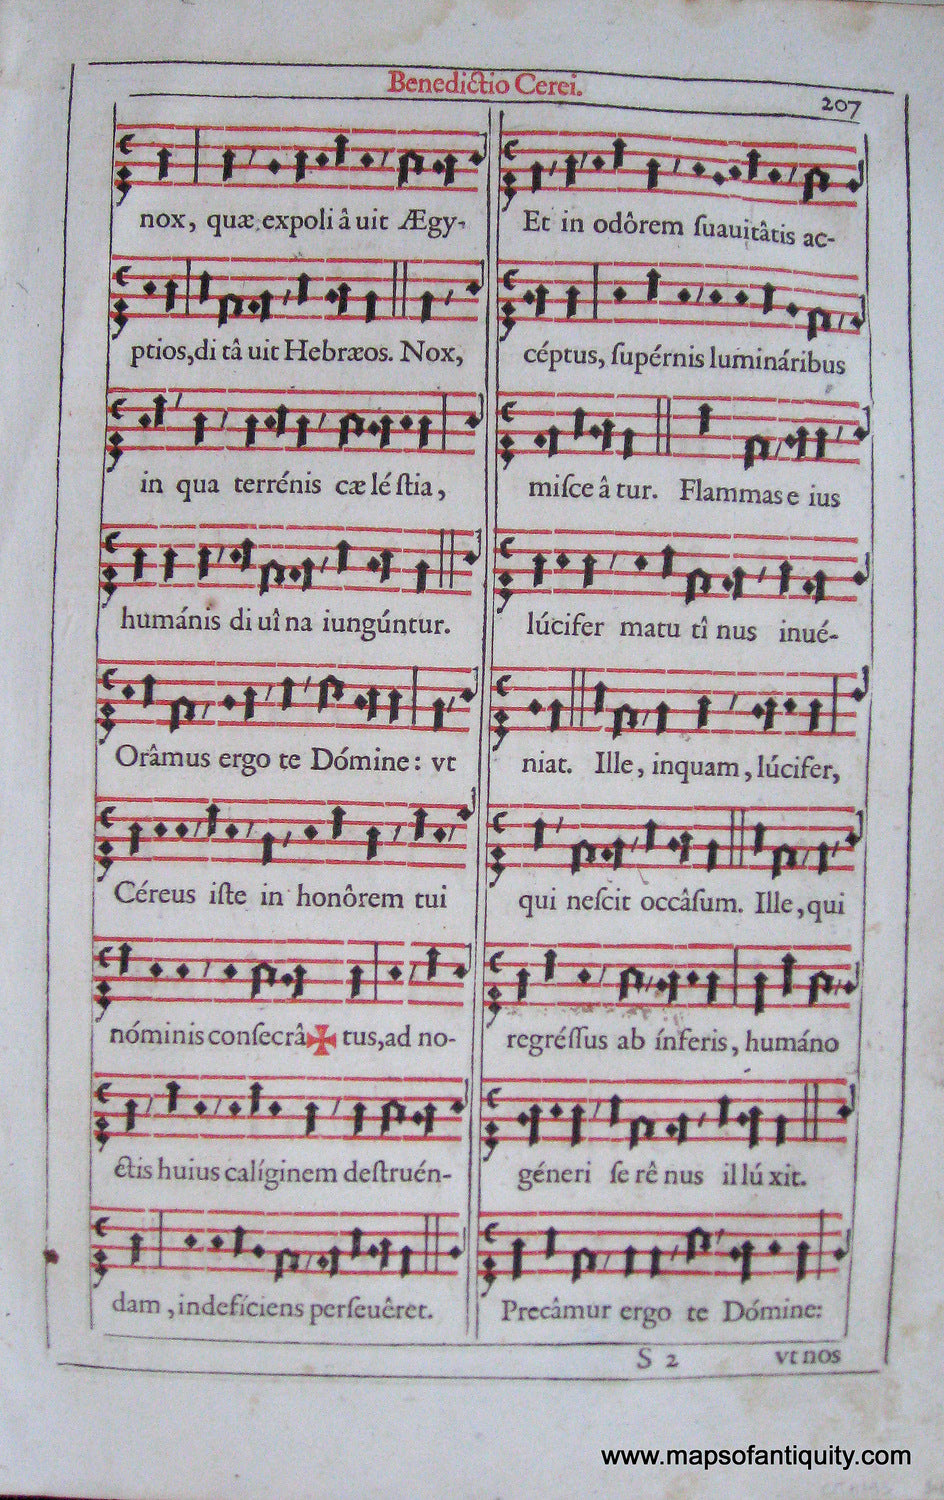 Printed-Black-and-Red-Antique-Sheet-Music-Antique-Sheet-Music-Benedictio-Cerei-pg.-207-208-**********-Antique-Prints-Antique-Sheet-Music-c.-17th-century-Unknown-Maps-Of-Antiquity